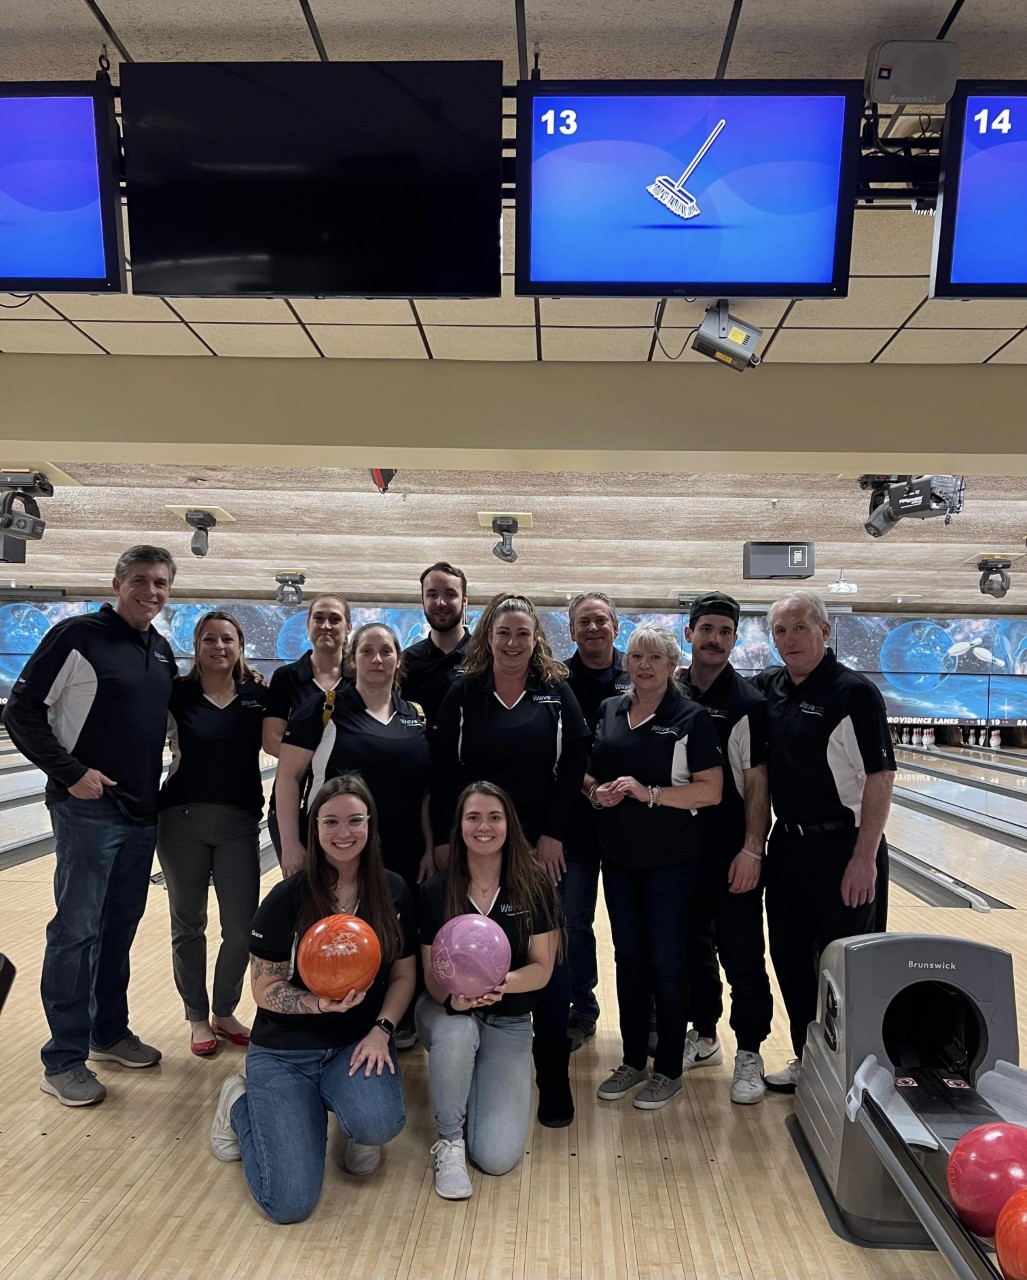 Group photo of the Wave team at the Strike for gold bowling tourament